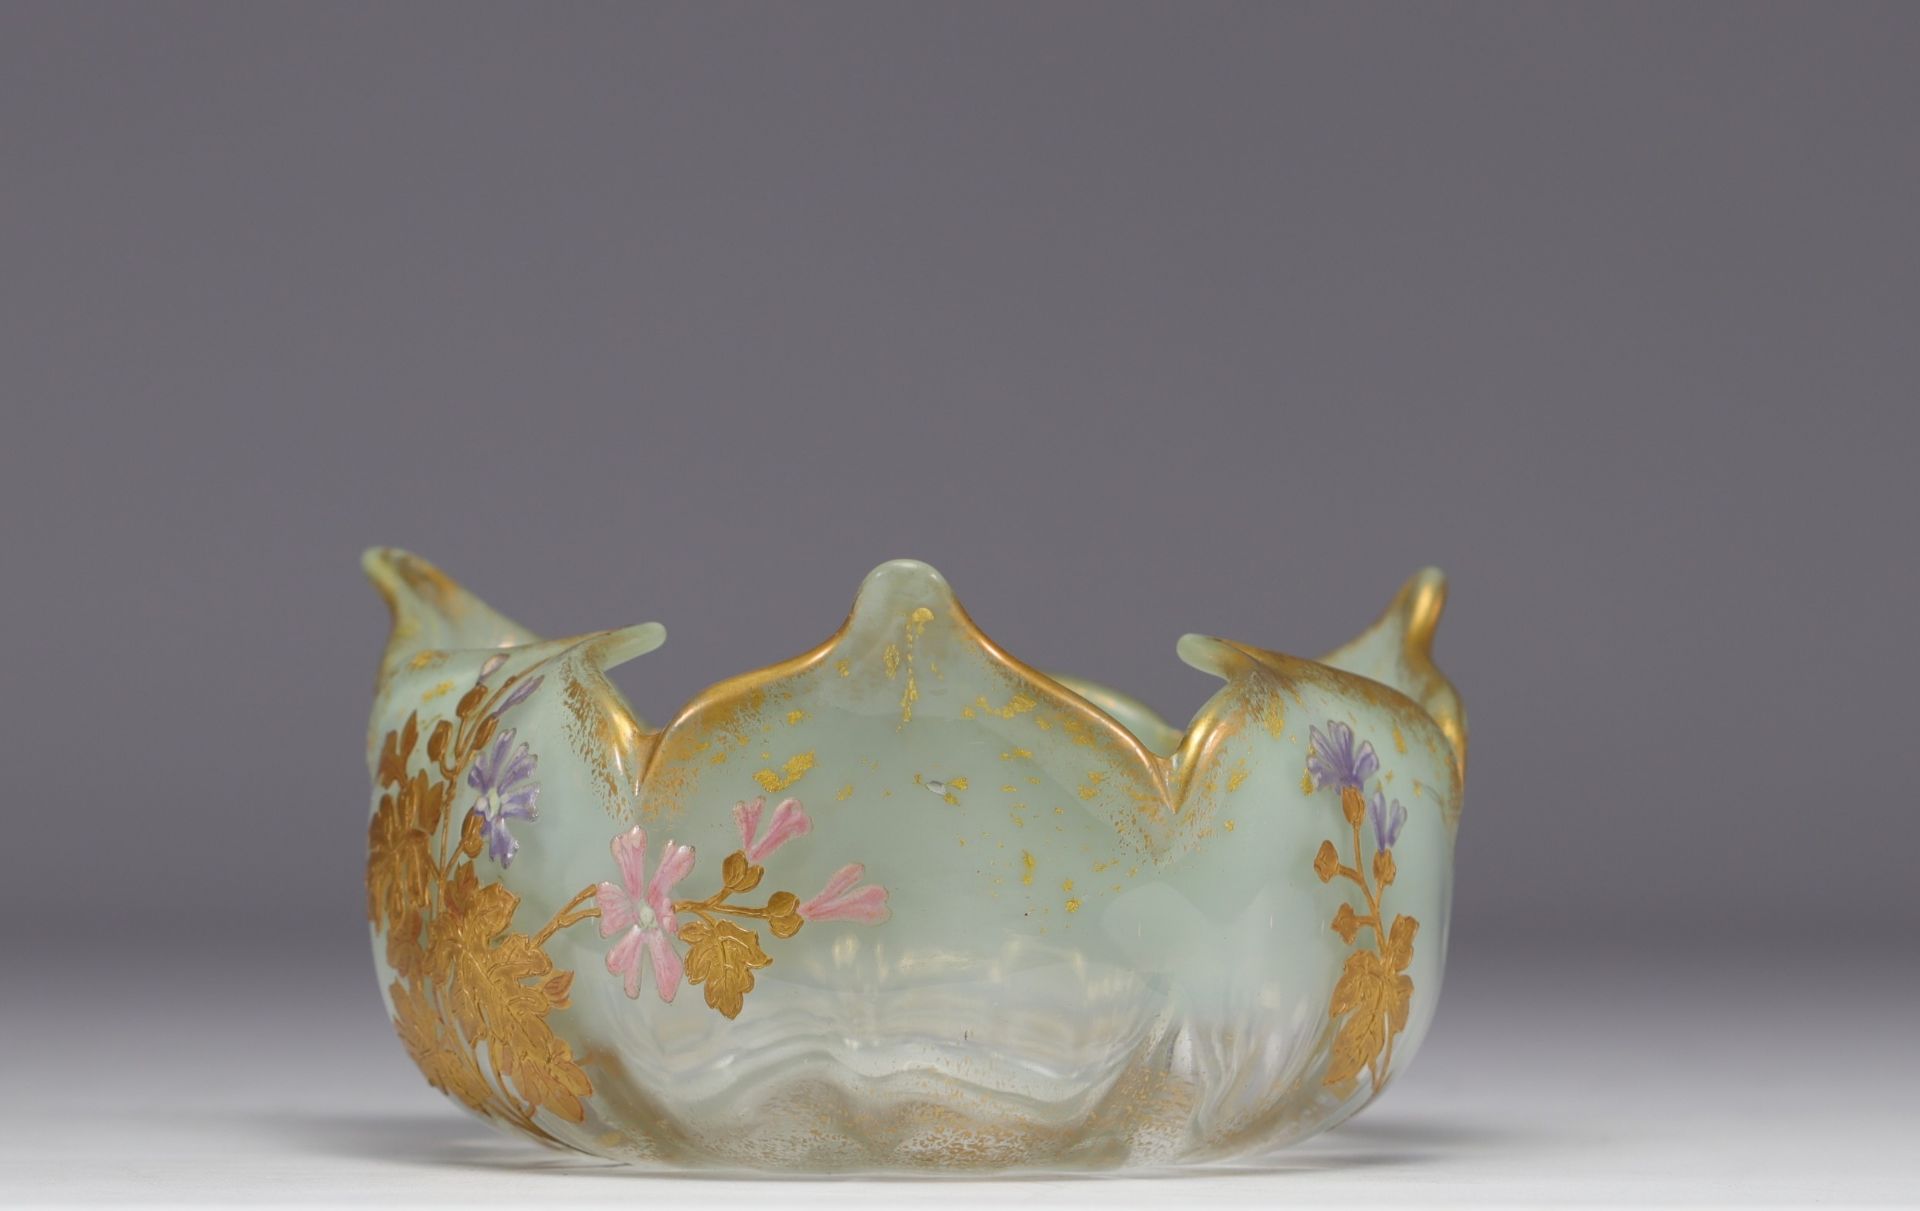 MONTJOIE, enameled three-lobed bowl with yellow and pink floral design on a green water background. - Image 2 of 3